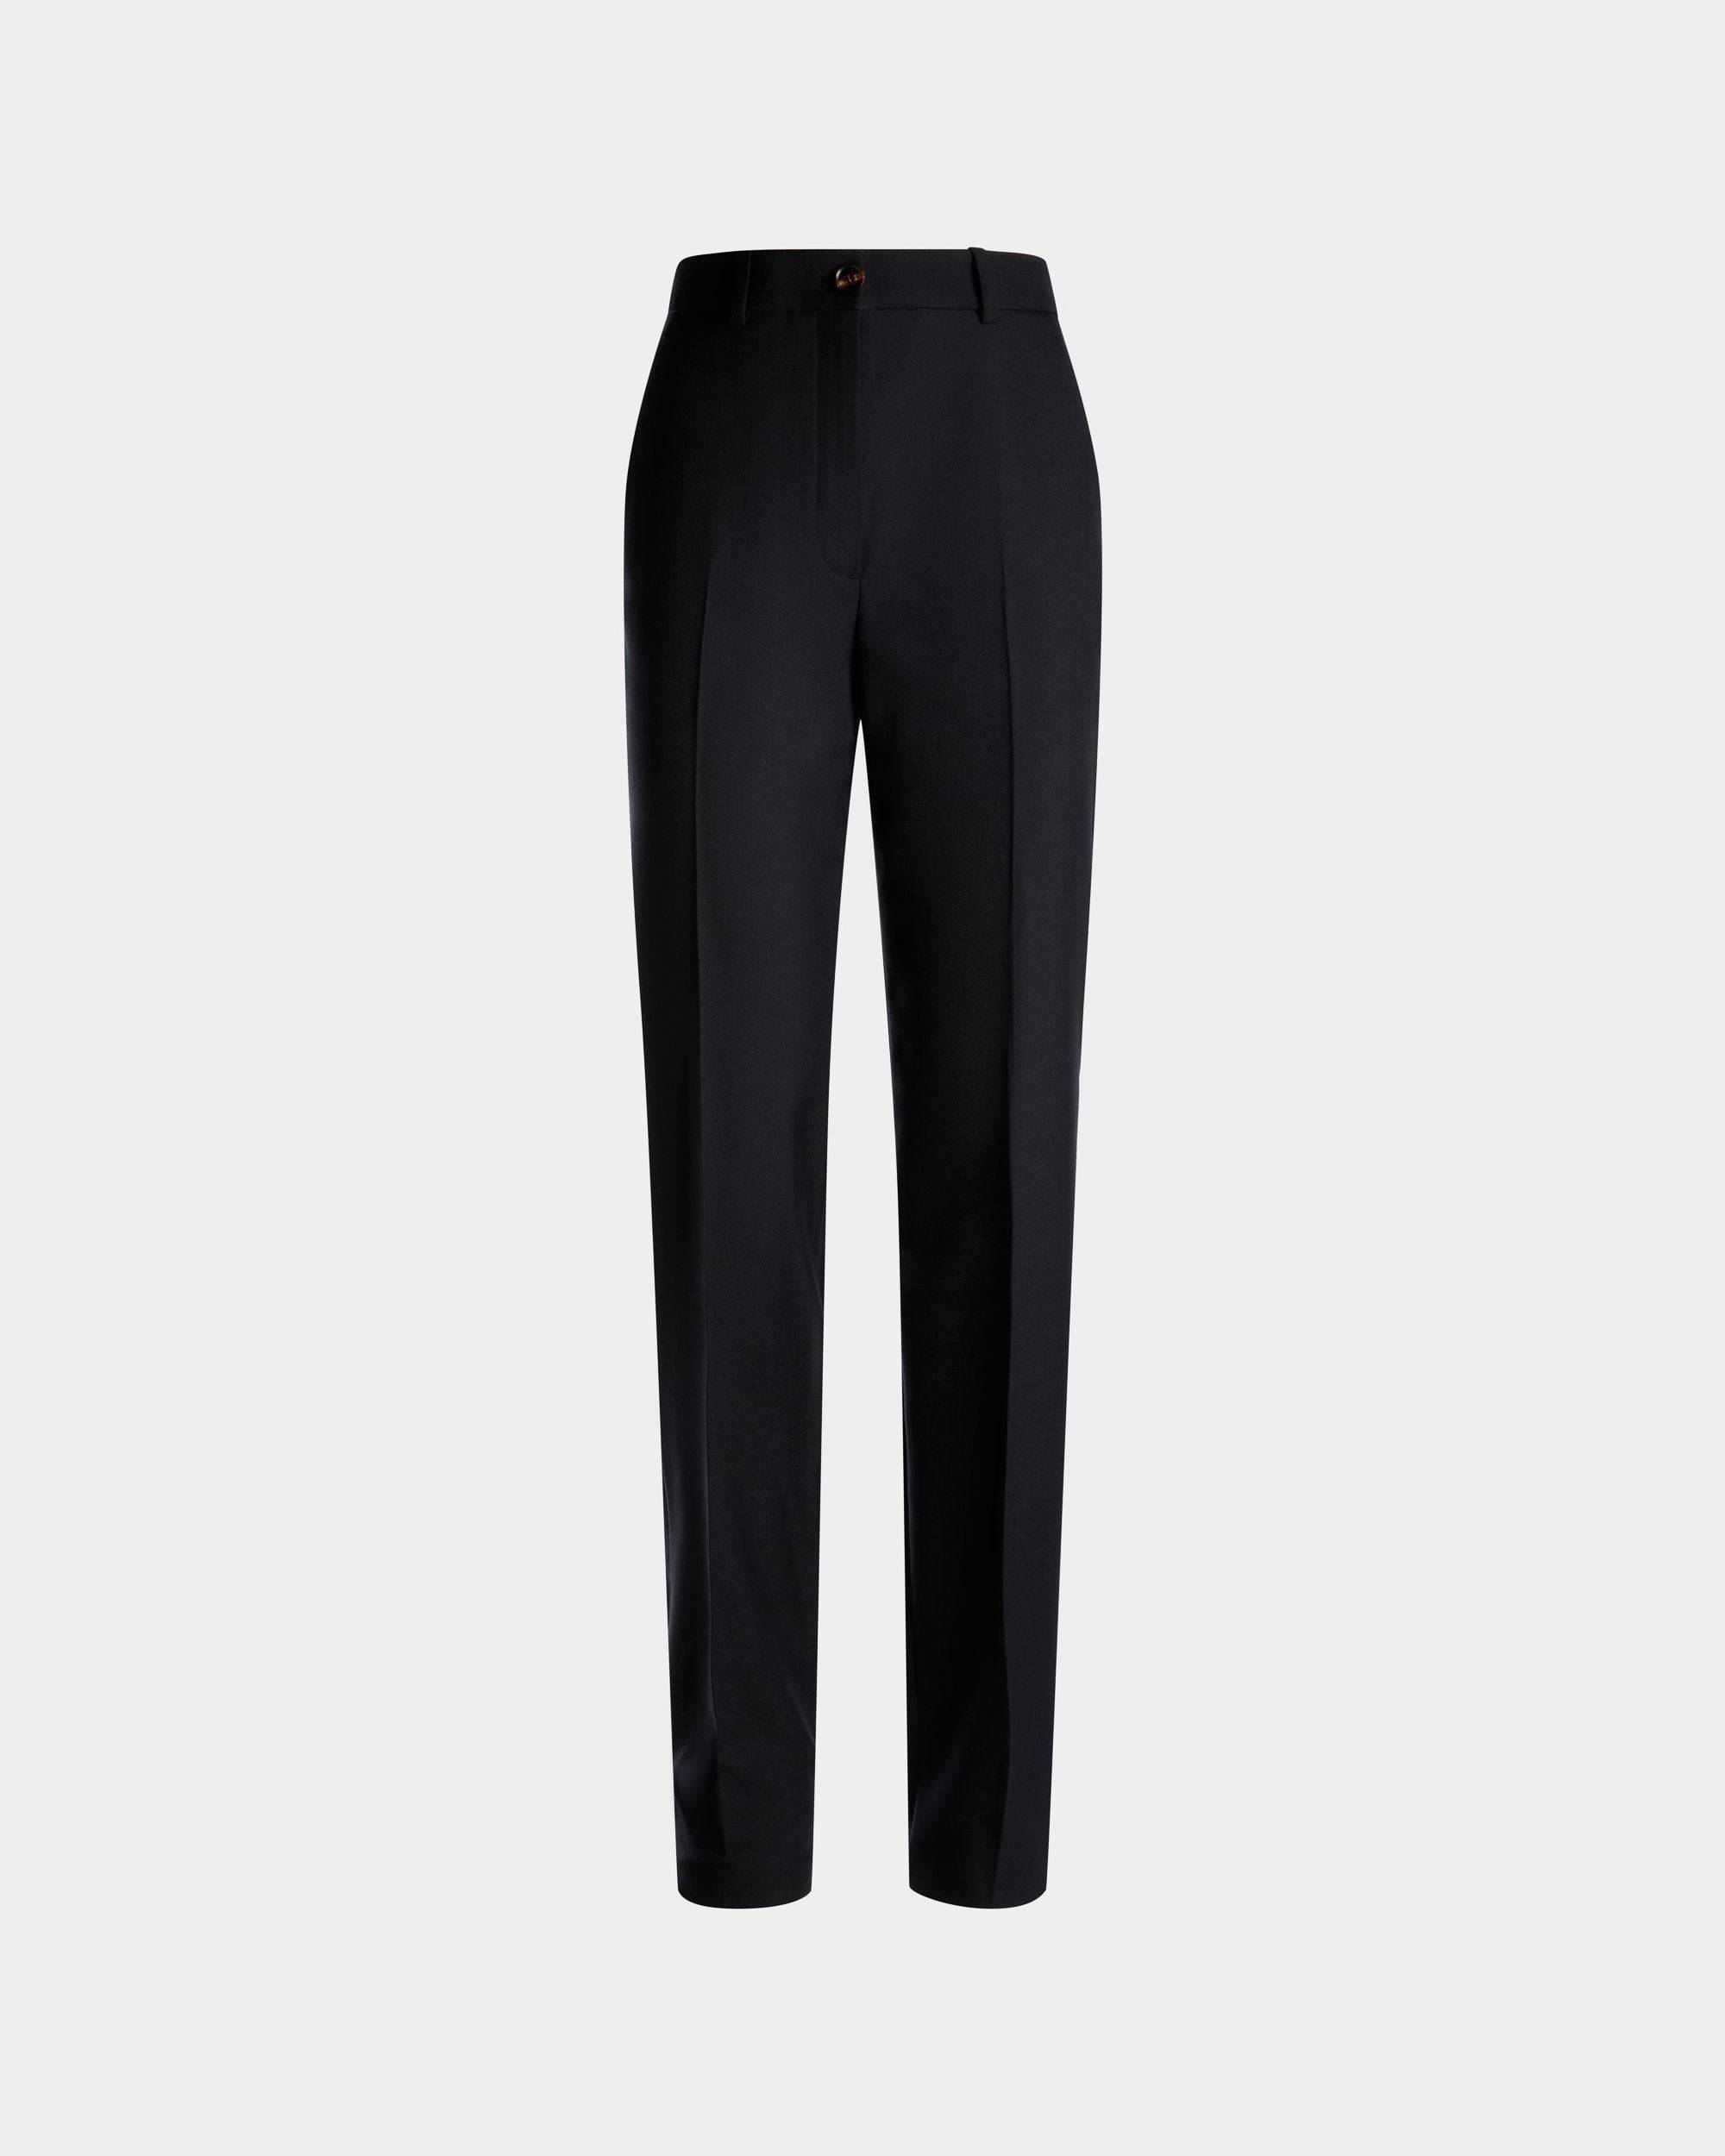 Women's Straight Fit Pants in Navy Blue Wool Blend | Bally | Still Life Front